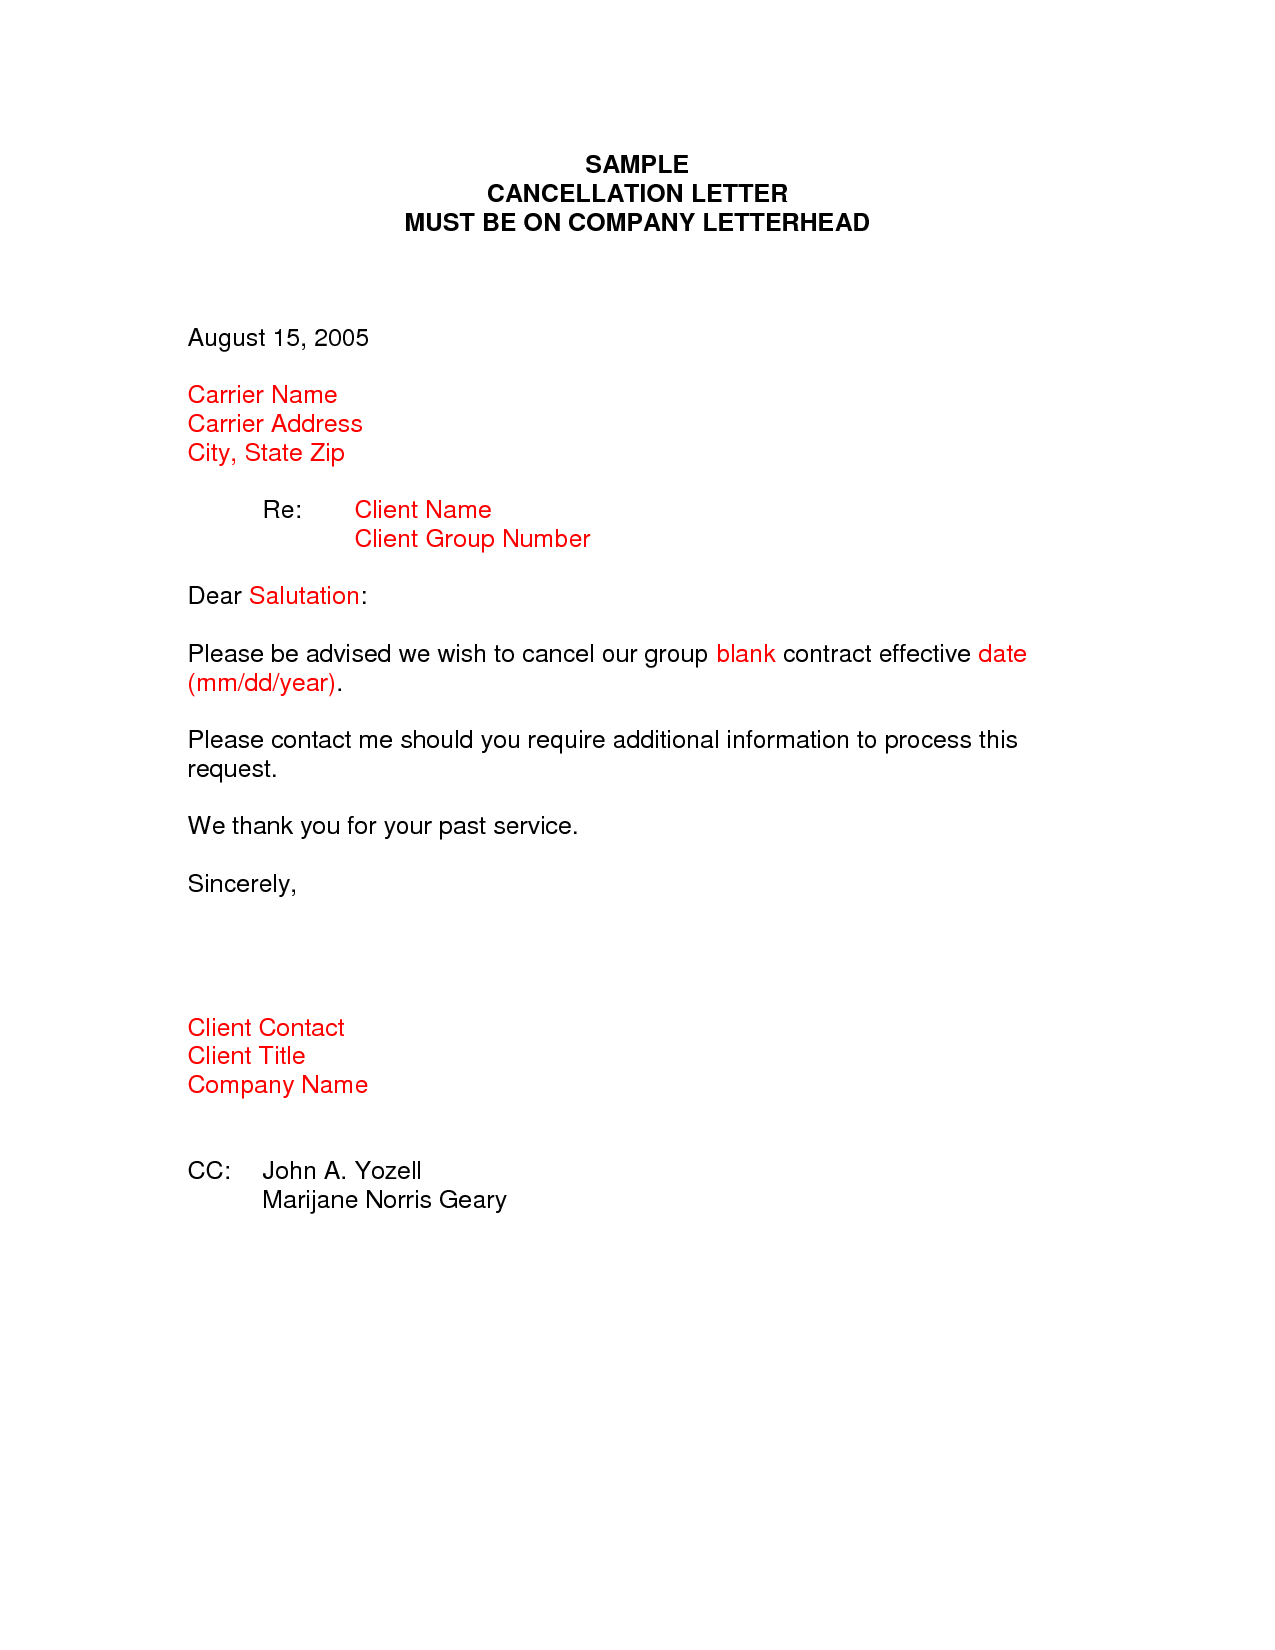 Extended Car Warranty Cancellation Letter Template - Sample Termination Letter format Business Case Examples Free Cover